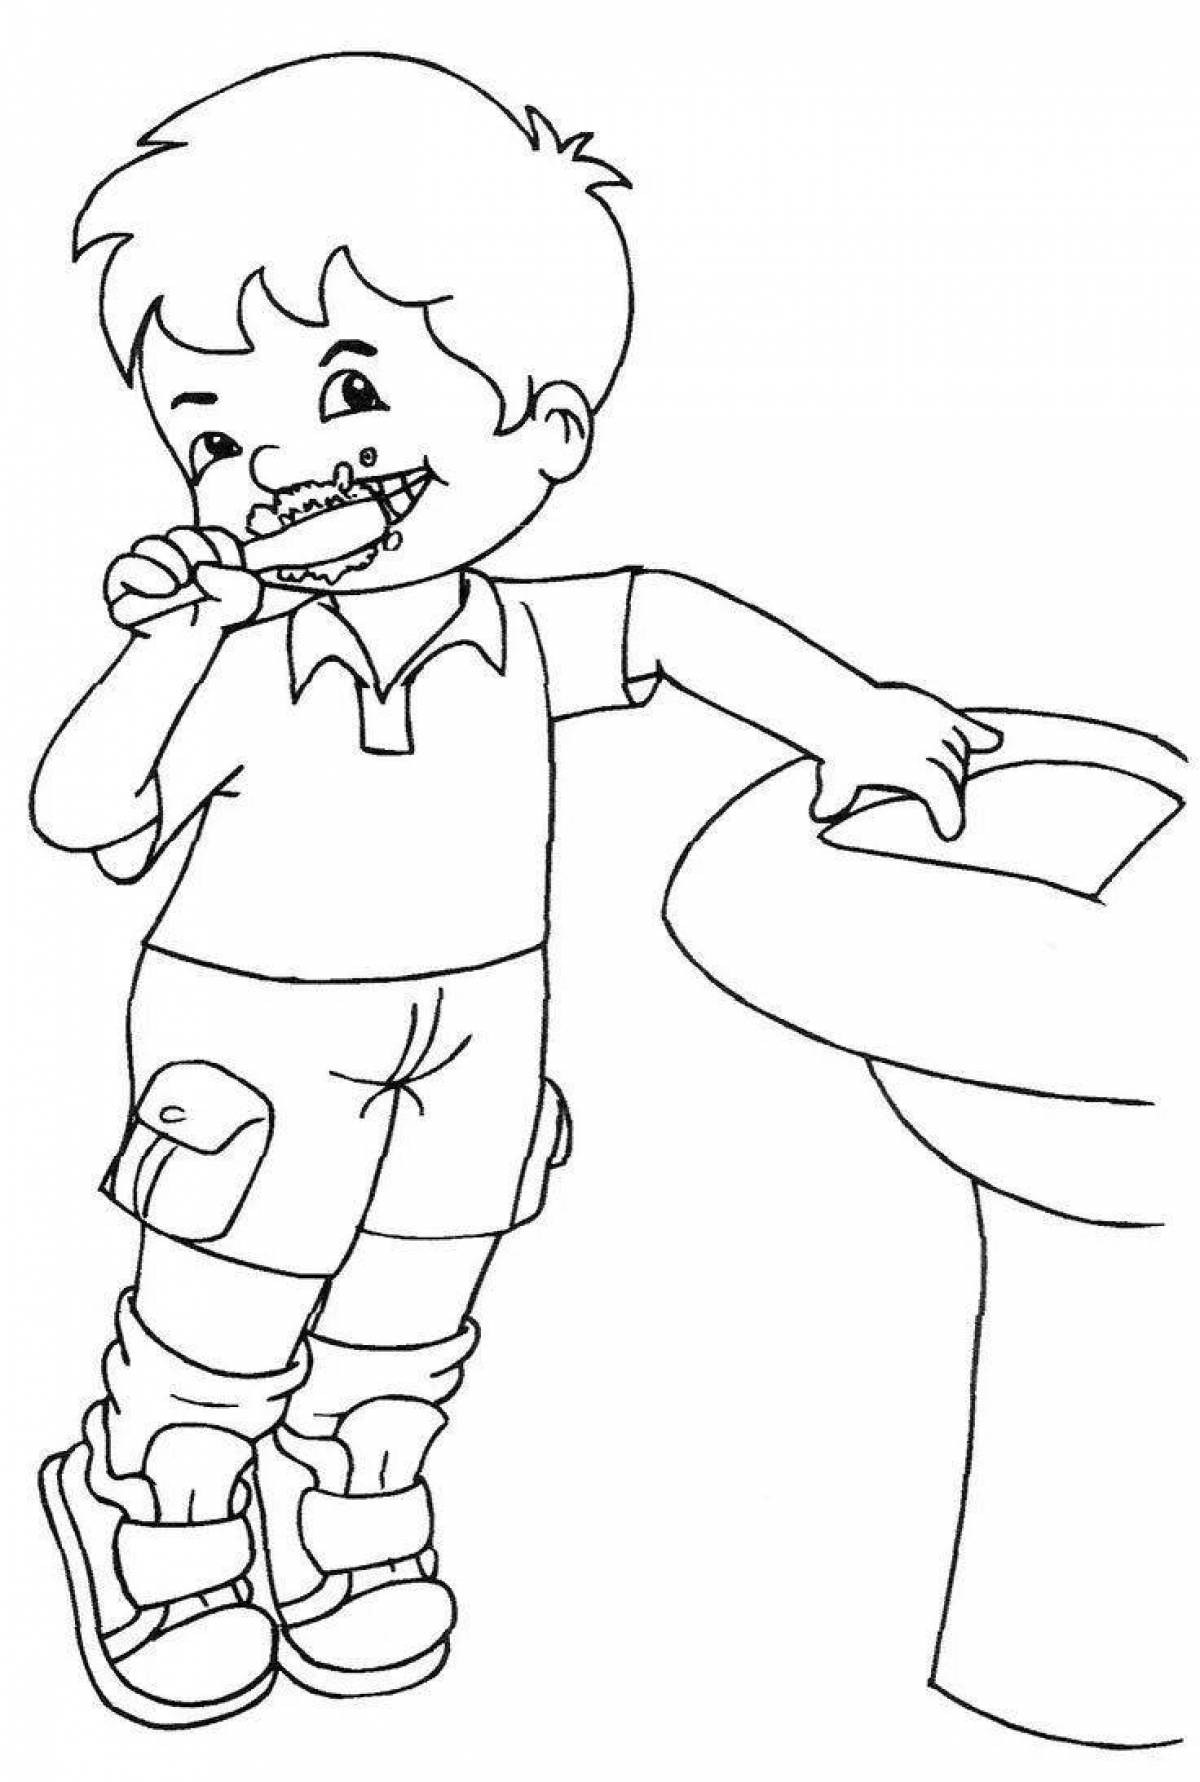 Health stimulating coloring pages for kids